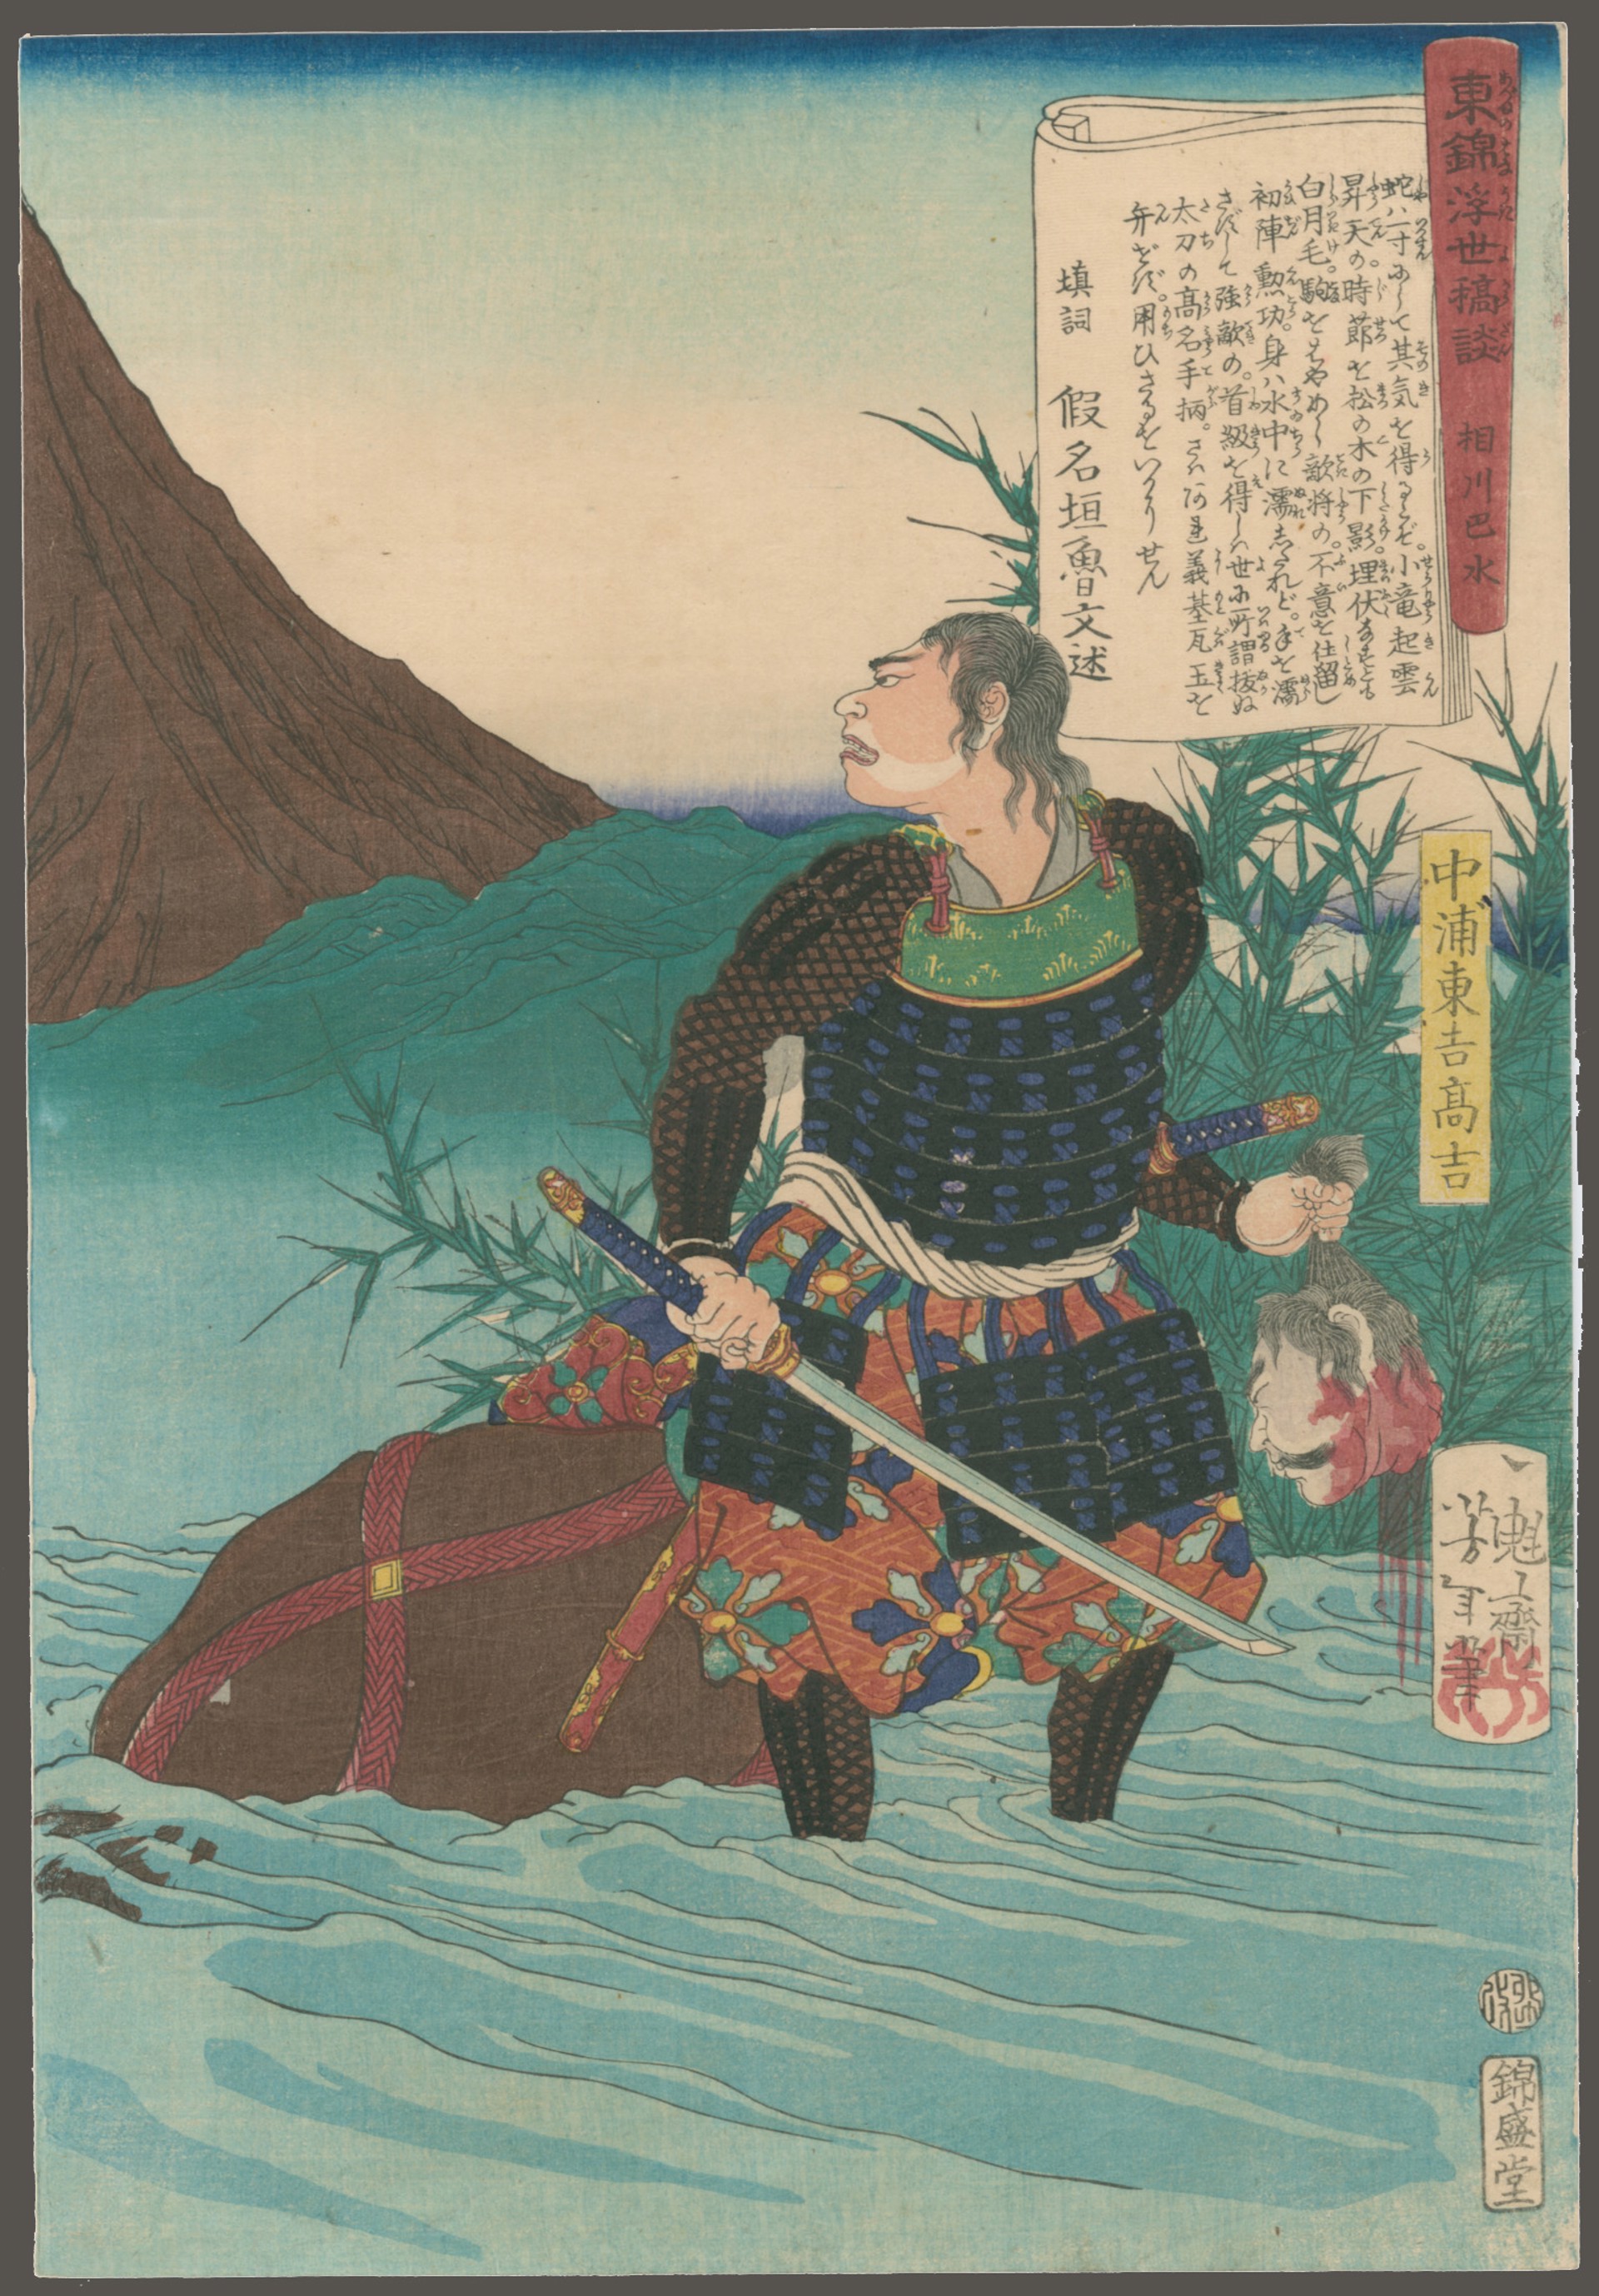 Nakaura Takayoshi with a Severed Head Tales of the Floating World on Eastern Brocade by Yoshitoshi